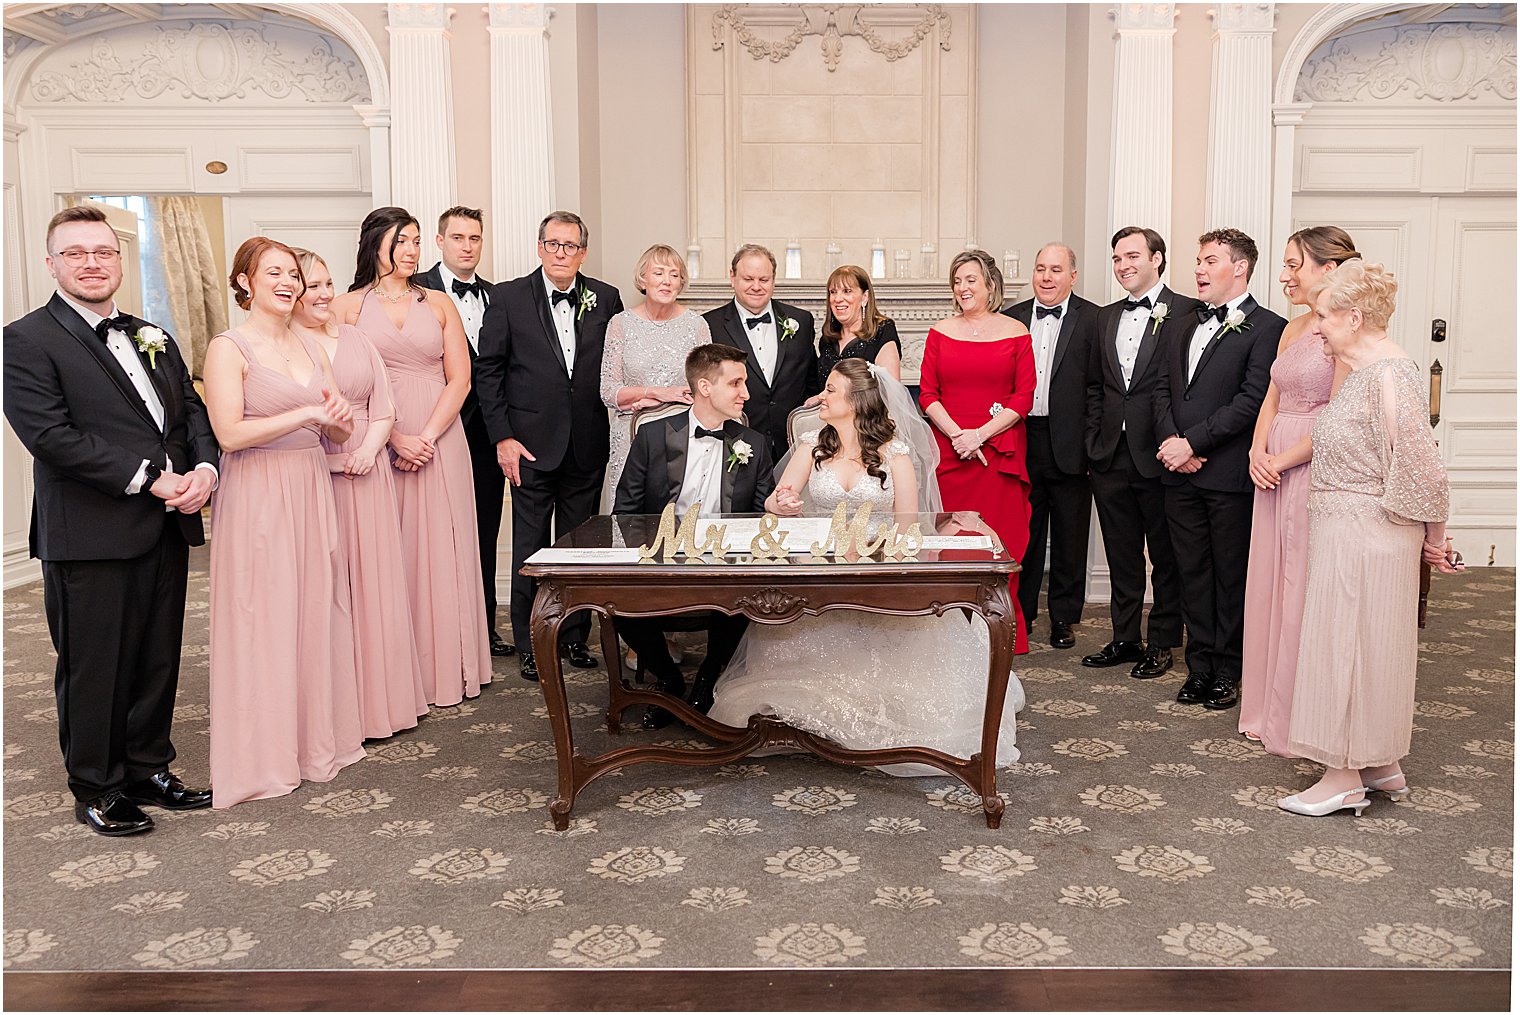 bride and groom sign Ketubah with family around them